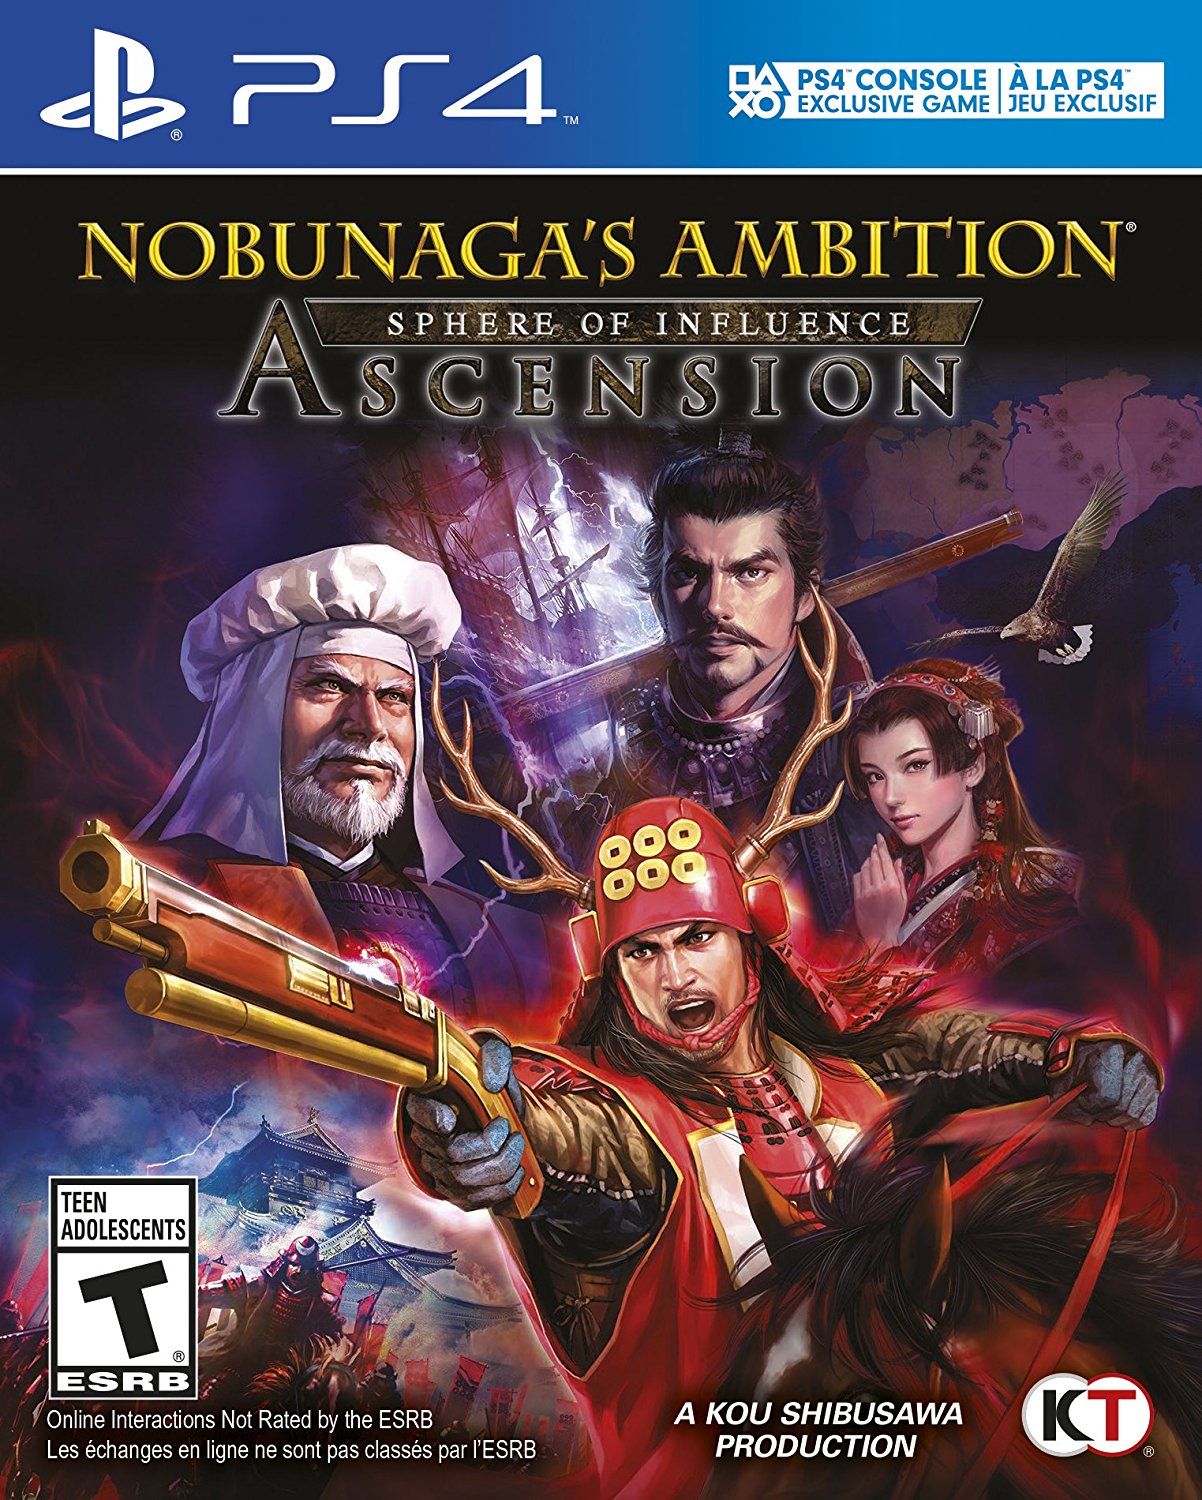 nobunagas-ambition-sphere-of-influence-ascension-box-art